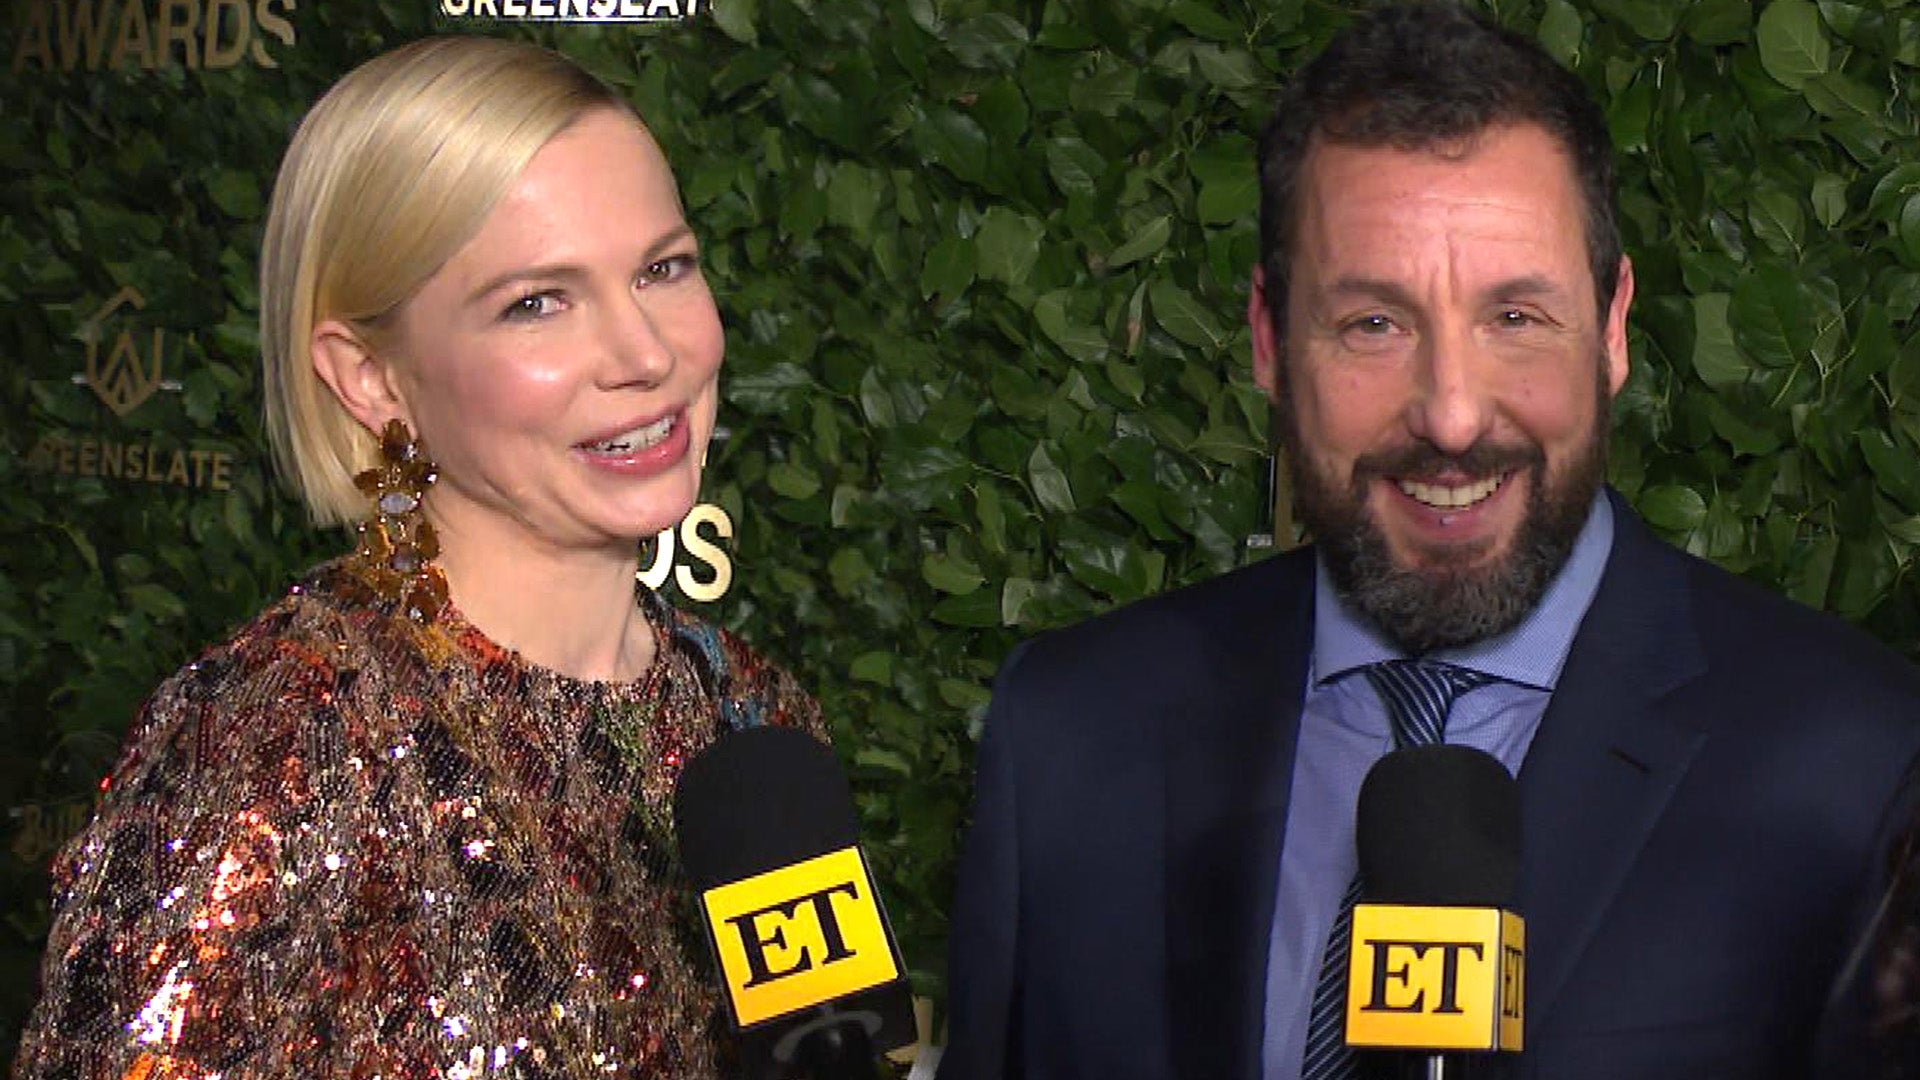 2022 Gotham Awards Highlights! Michelle Williams, Adam Sandler and More